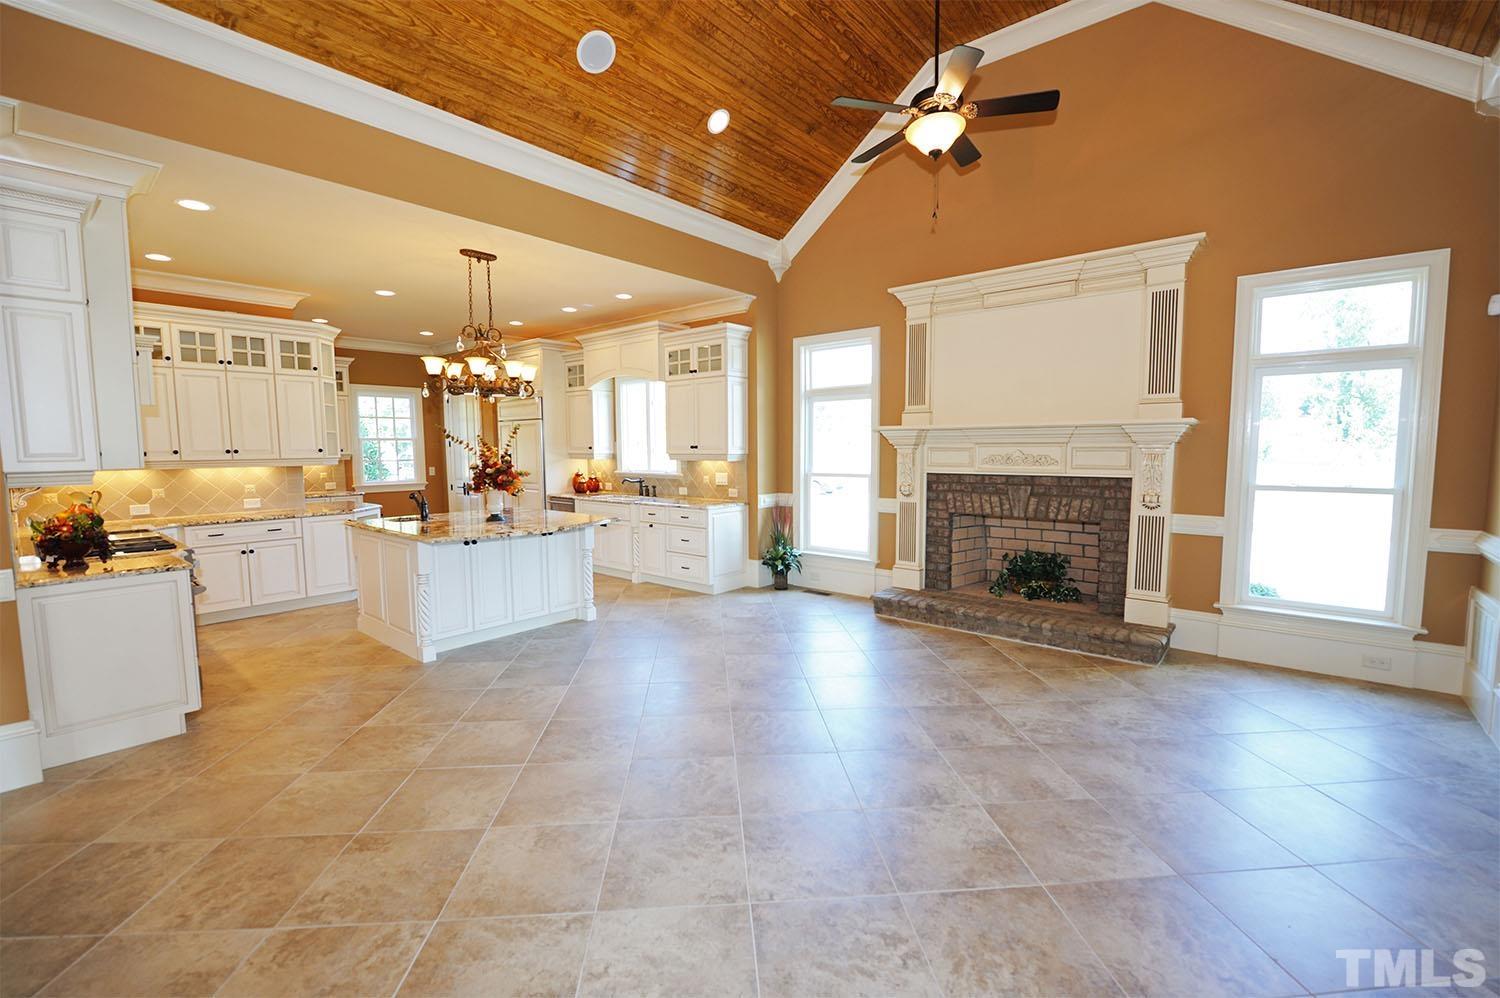 Cathedral ceiling with 1x6 stained bead board and oversized tile flooring. Masonry wood-burning fireplace that has a hand-painted and glazed mantle. Chair rail and crown moldings and 12